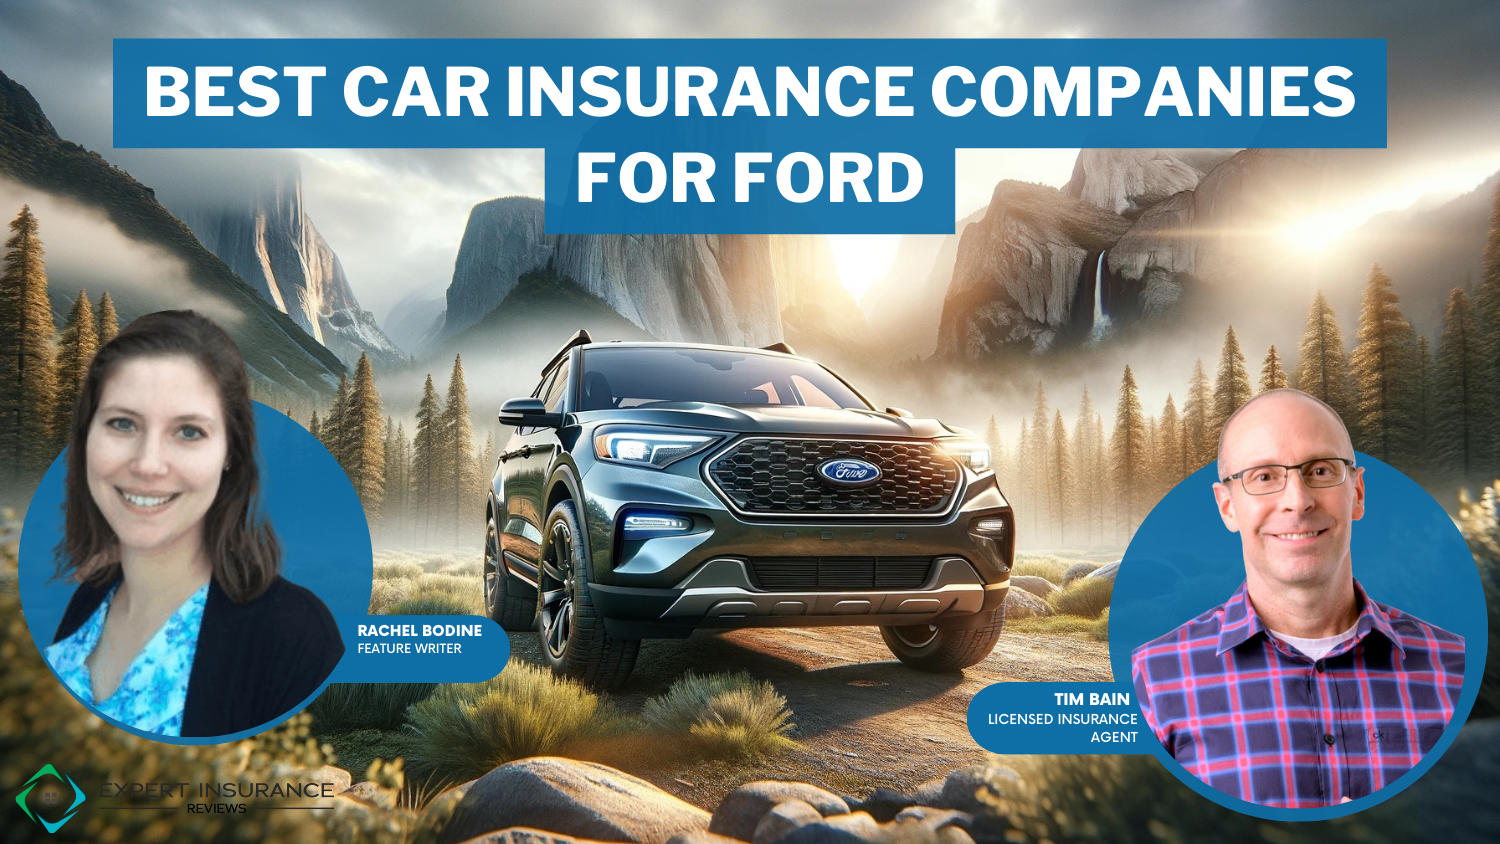 10 Best Car Insurance Companies for Fords: State Farm, Geico, and Progressive